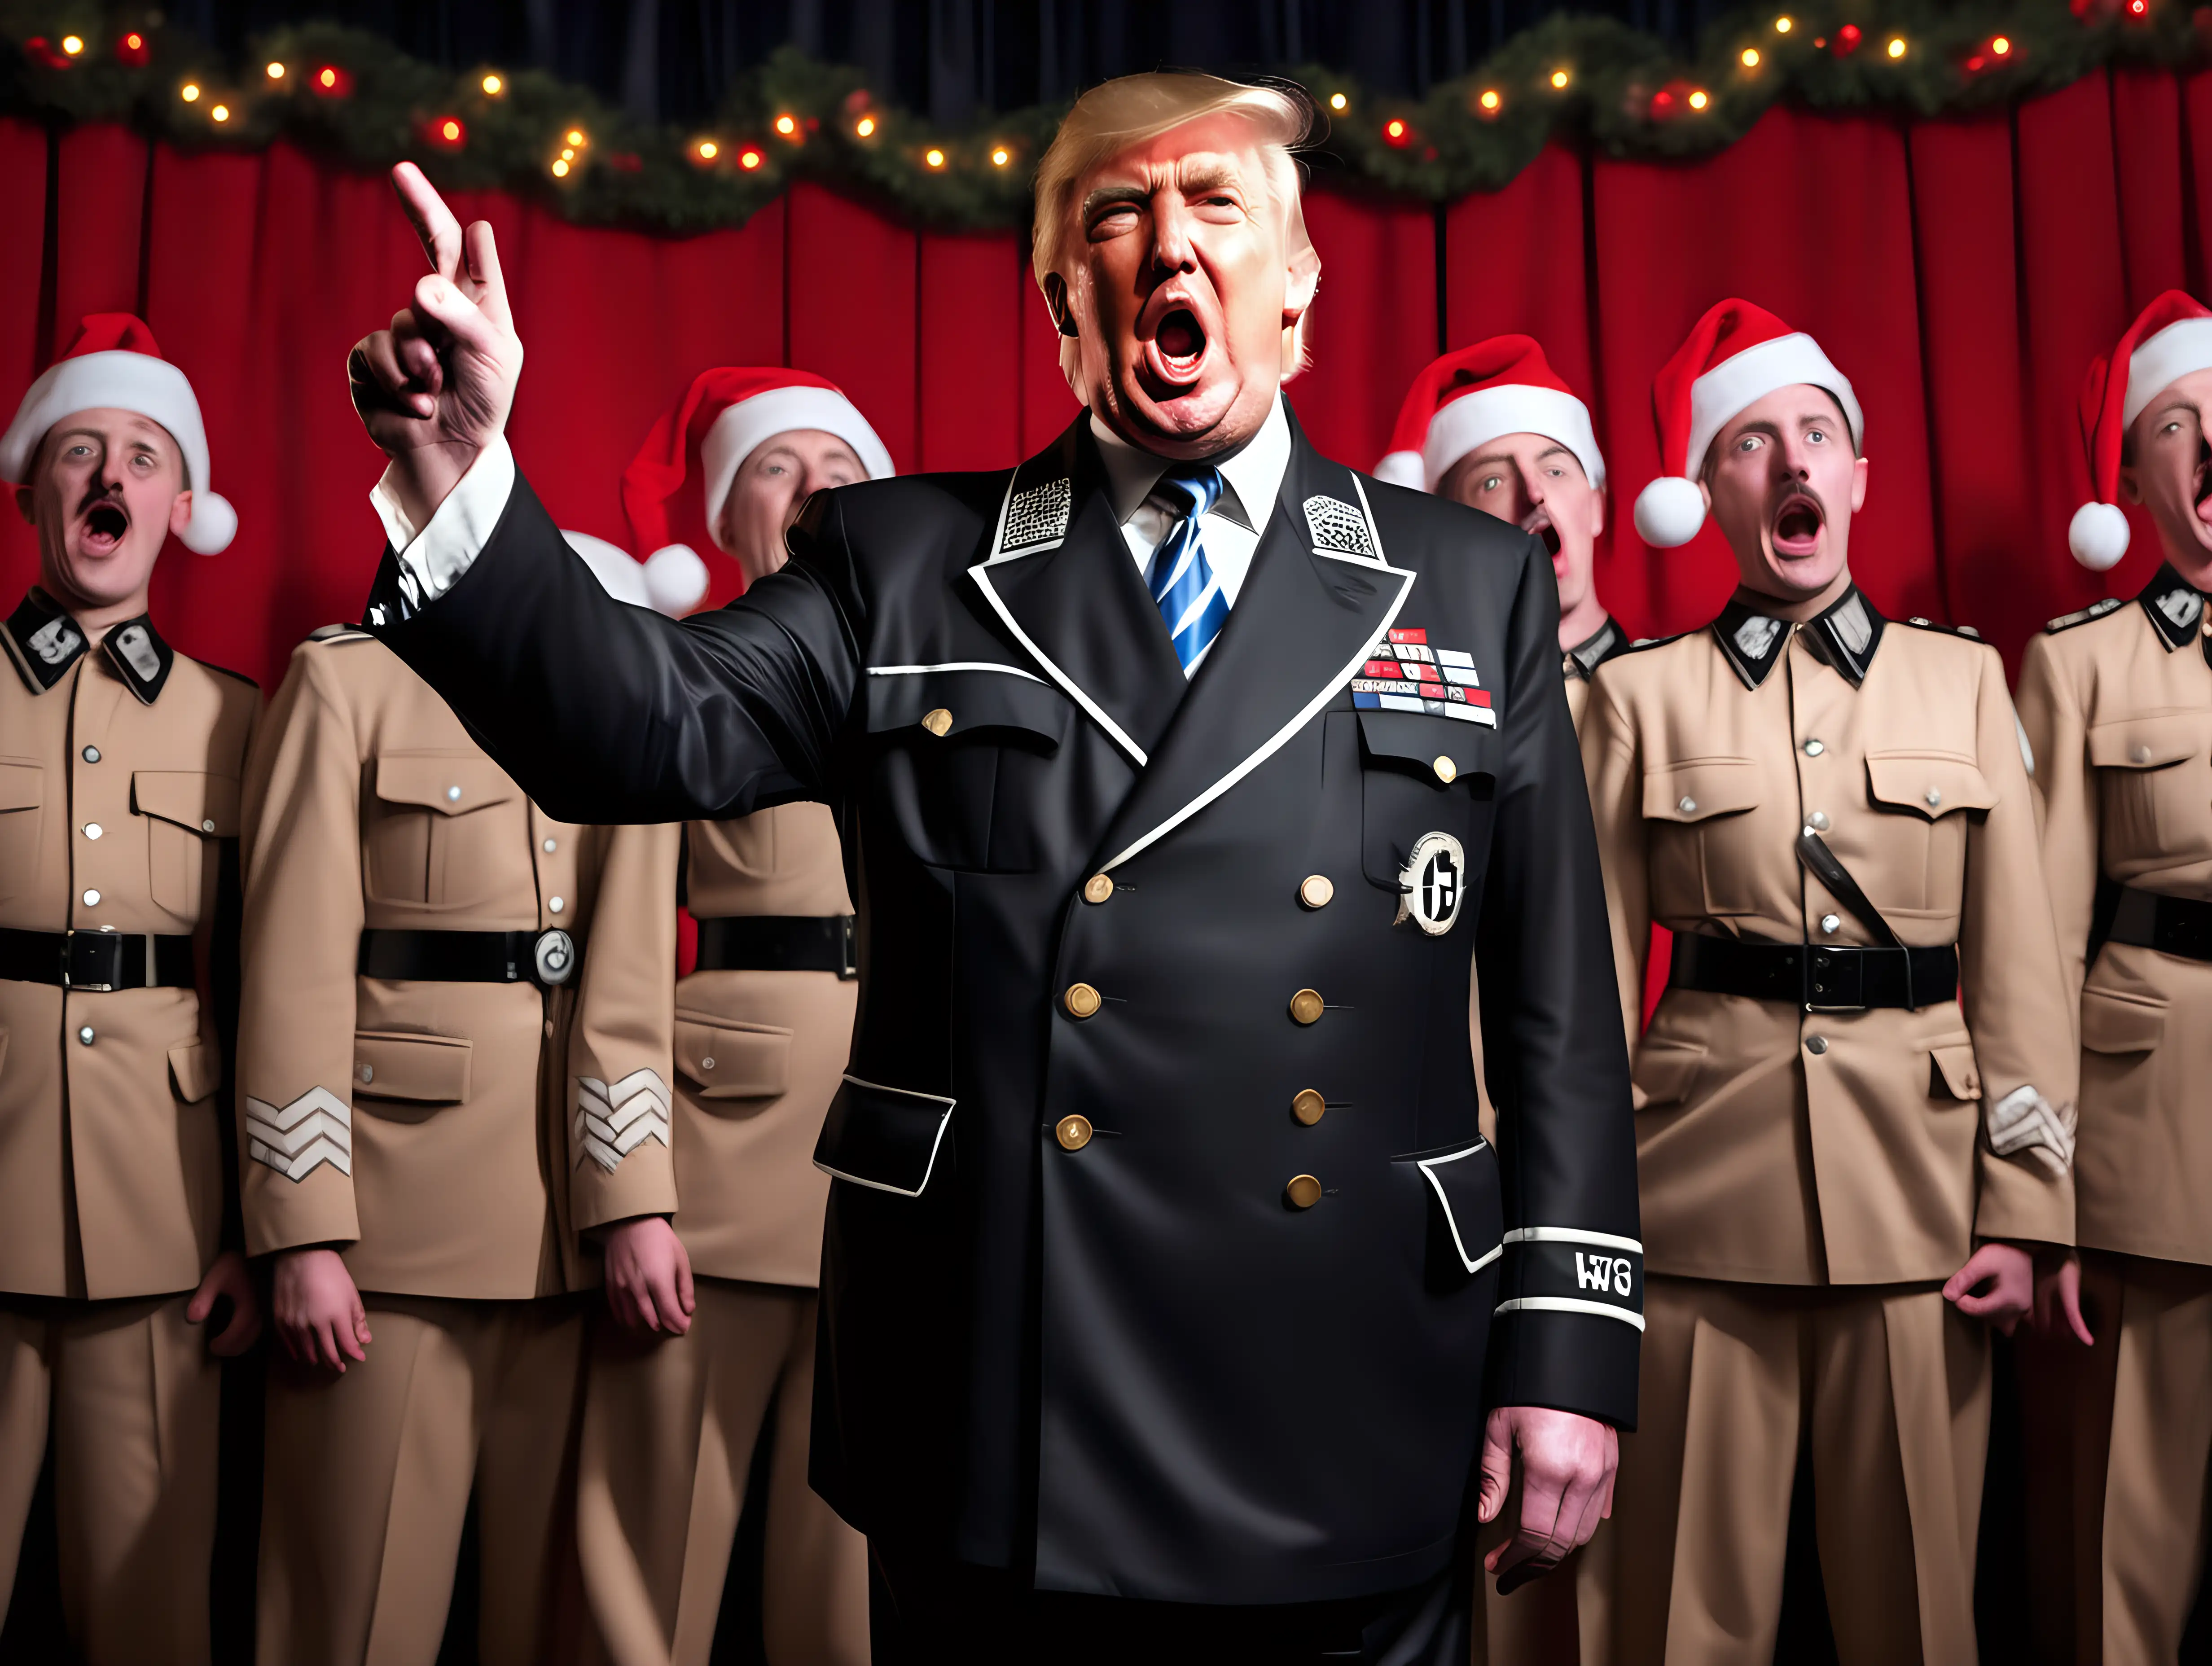 Controversial Historical Figures in Unusual Attire Trump and Hitler Christmas Performance